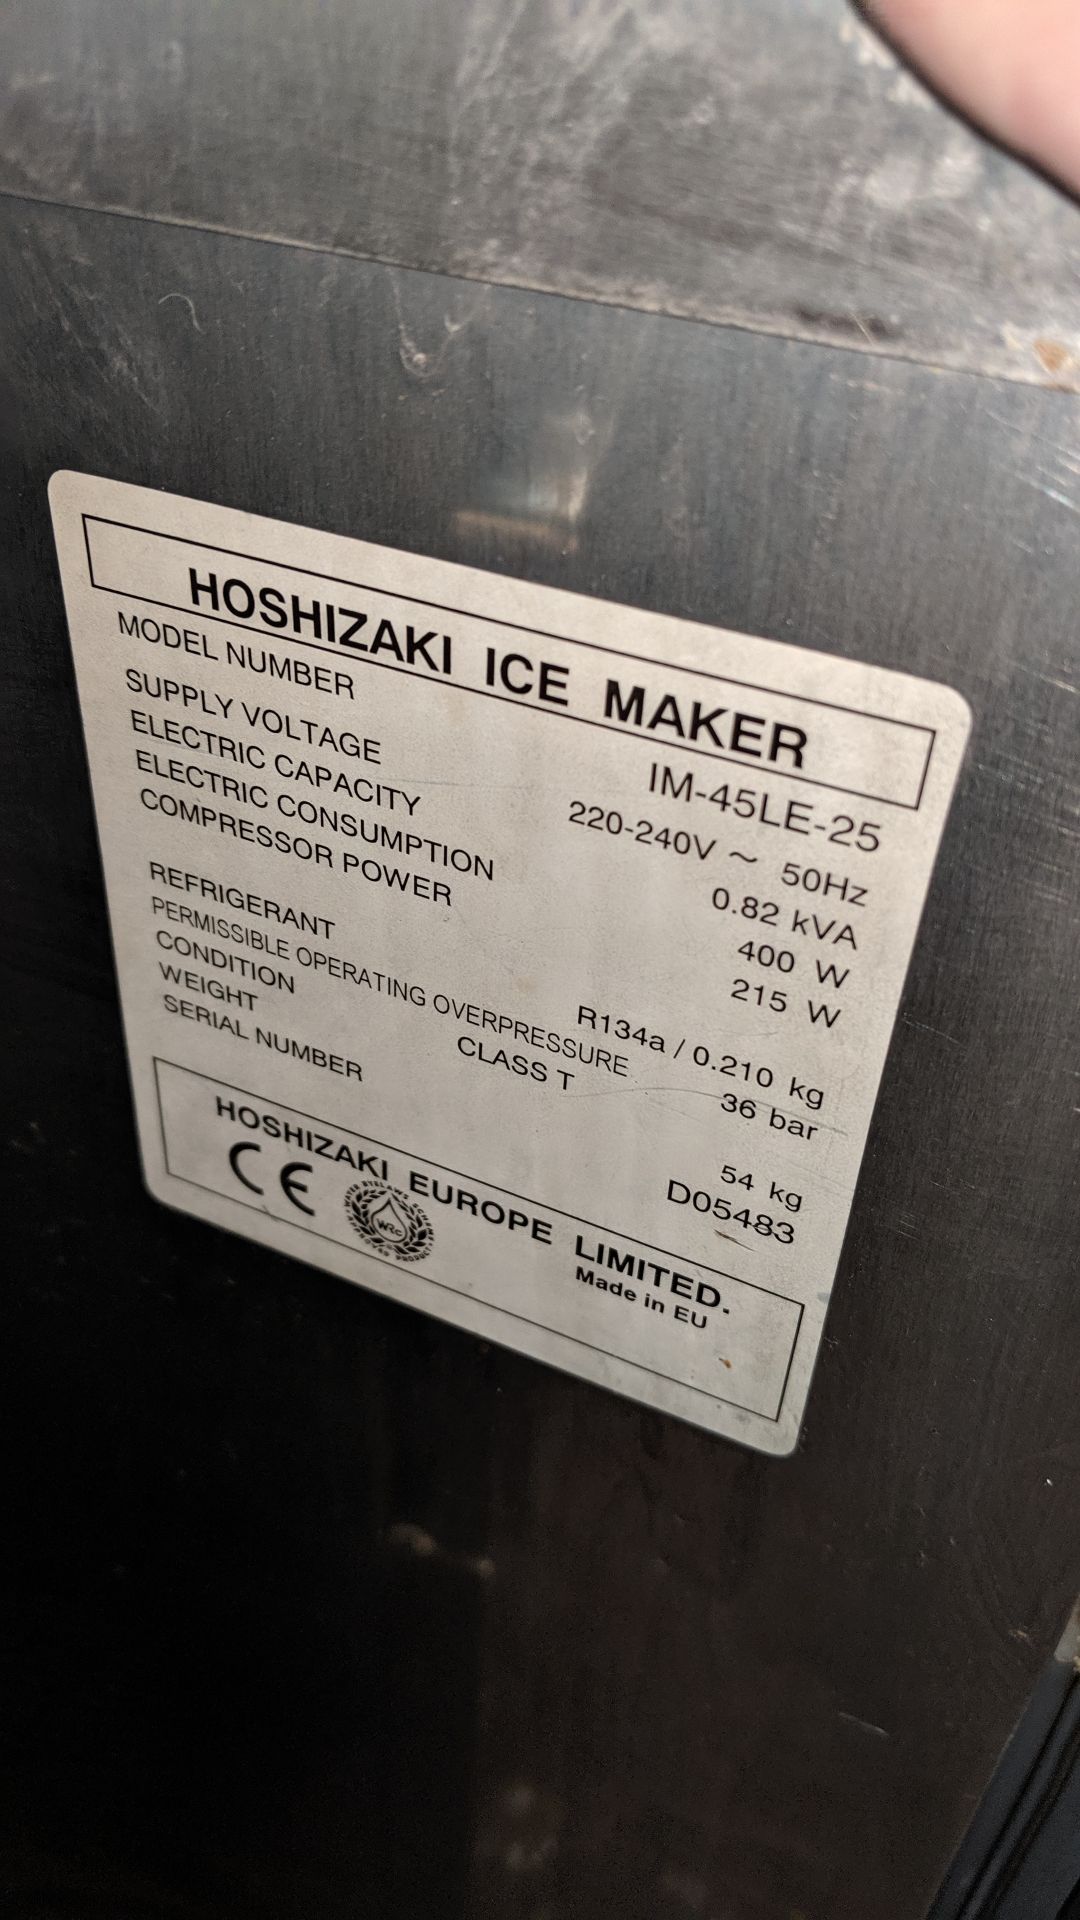 Hoshizaki stainless steel ice maker model IM-45LE-25 IMPORTANT: Please remember goods successfully - Image 3 of 4